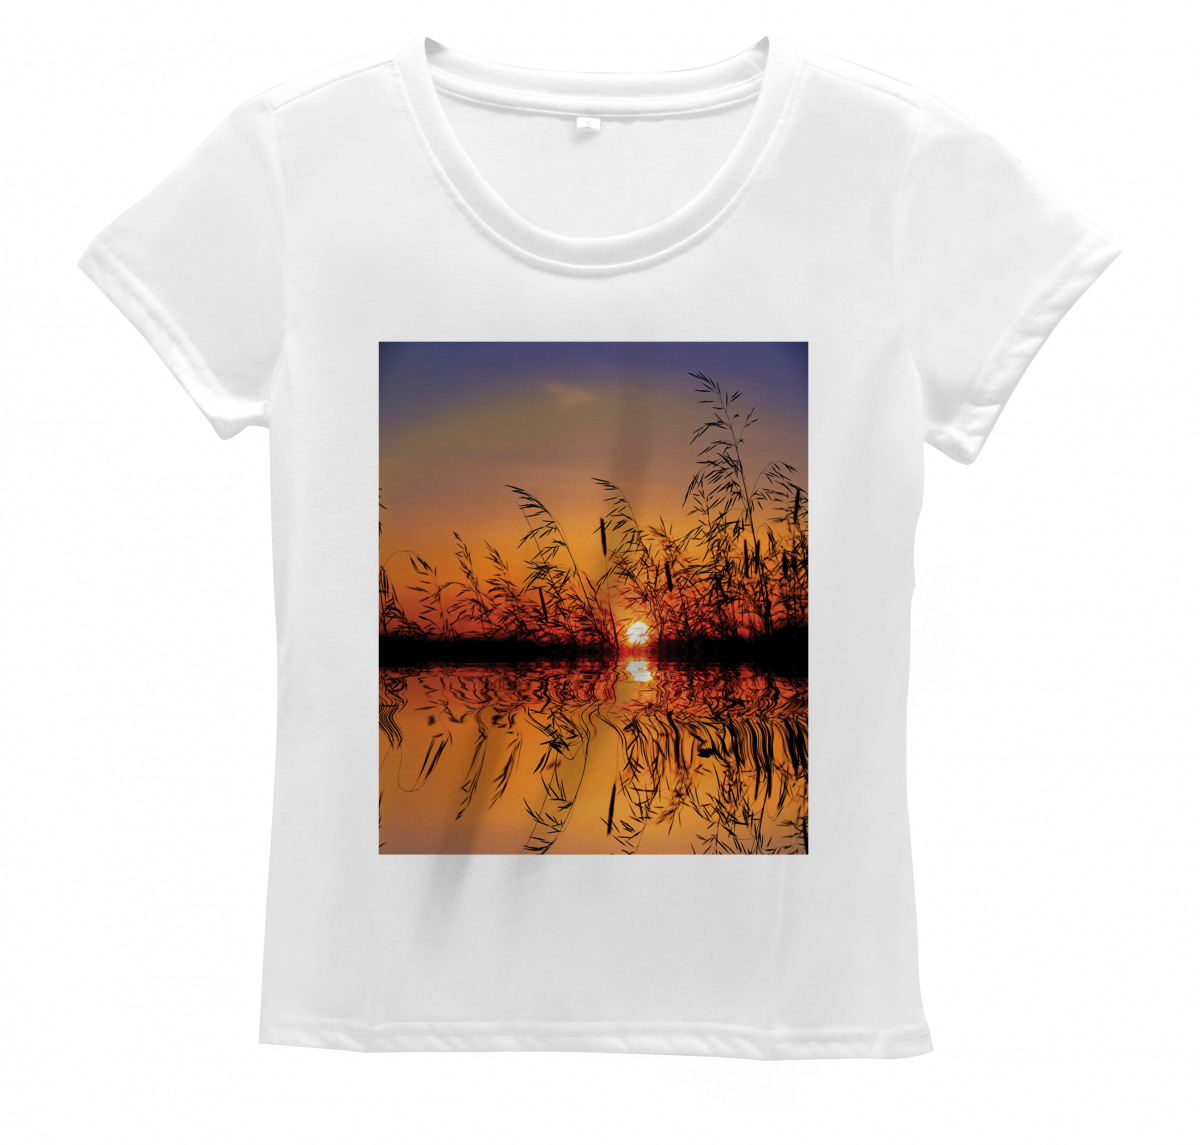 Nature Casual Tops Tees Sunset by Lake View Casual Tshirt O Neck Female Tops 